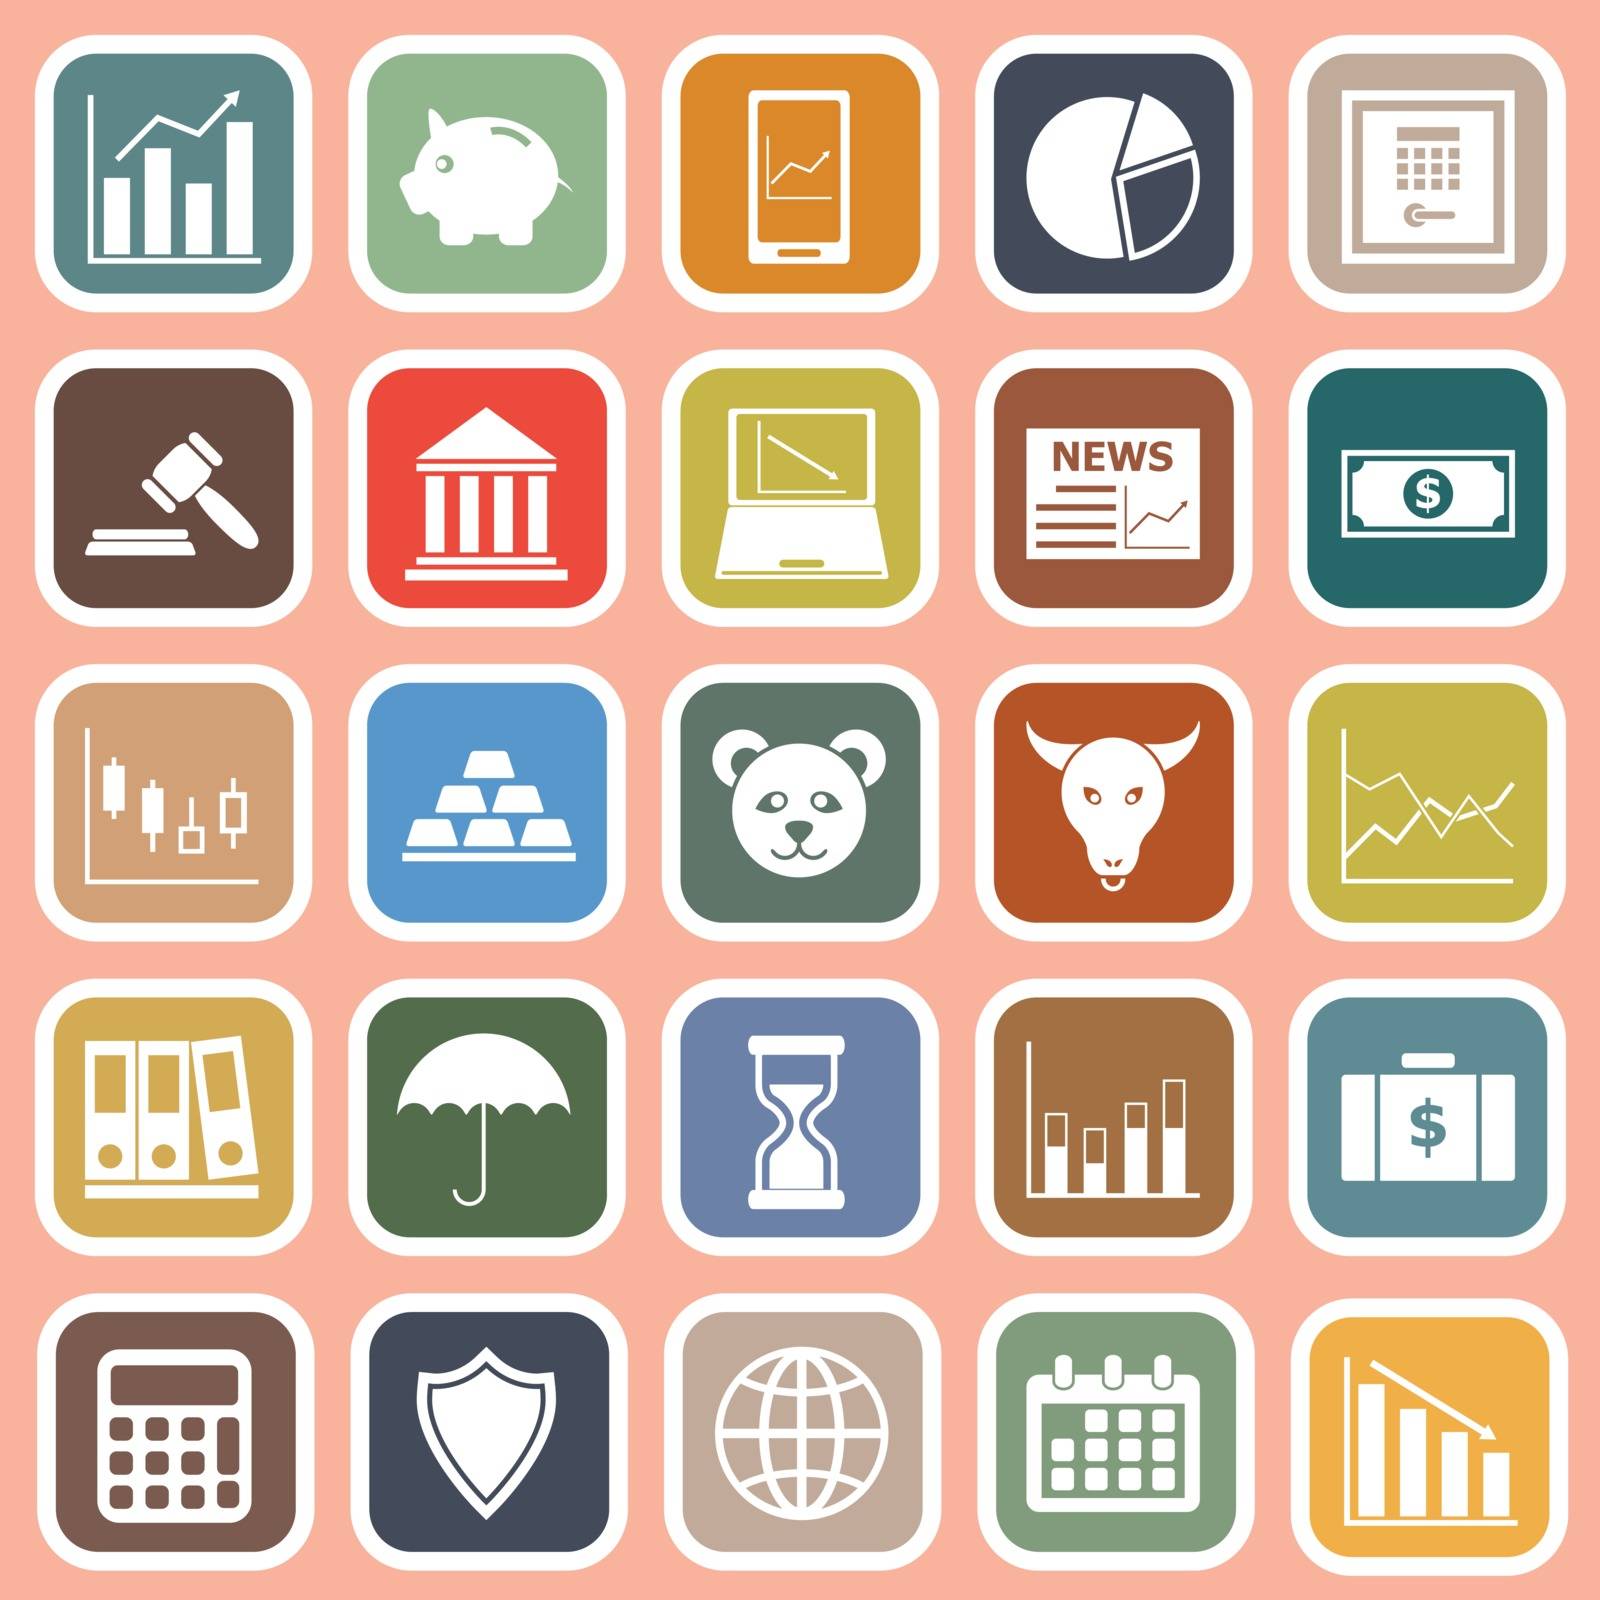 Stock market flat icons on red background by punsayaporn